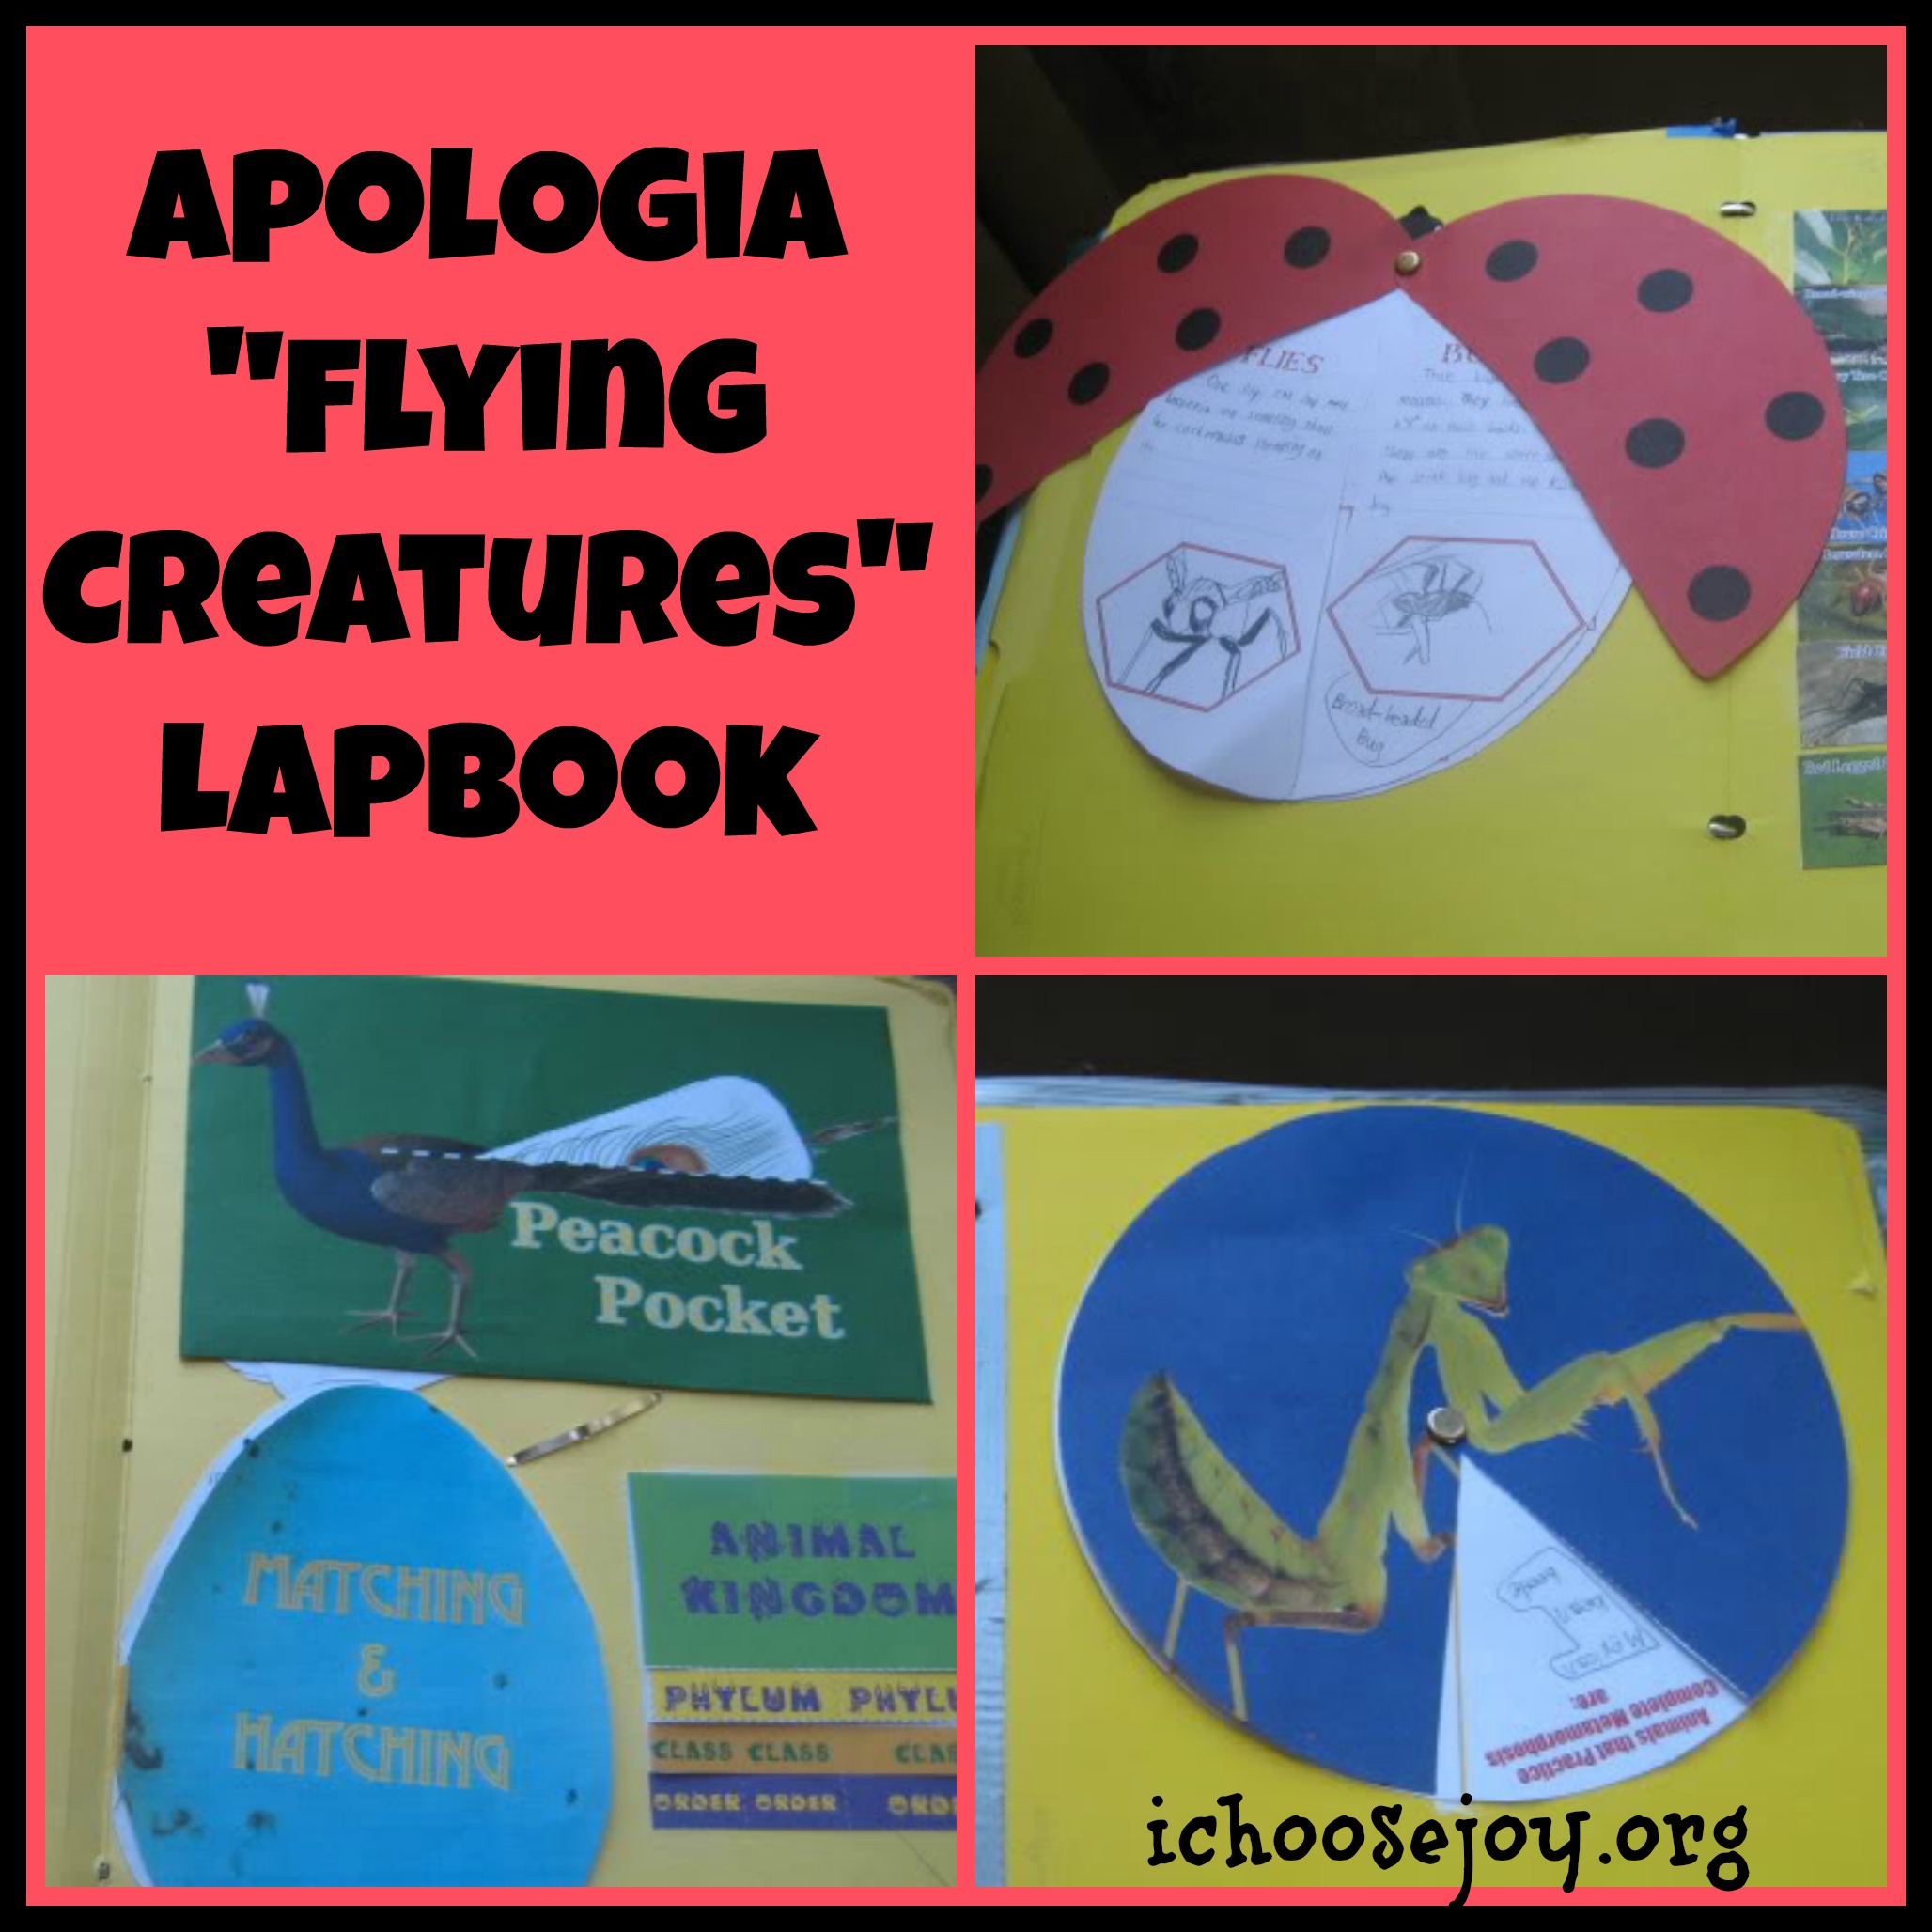 Apologia Flying Creatures Lapbook for your homeschool elementary science time, from I Choose Joy!